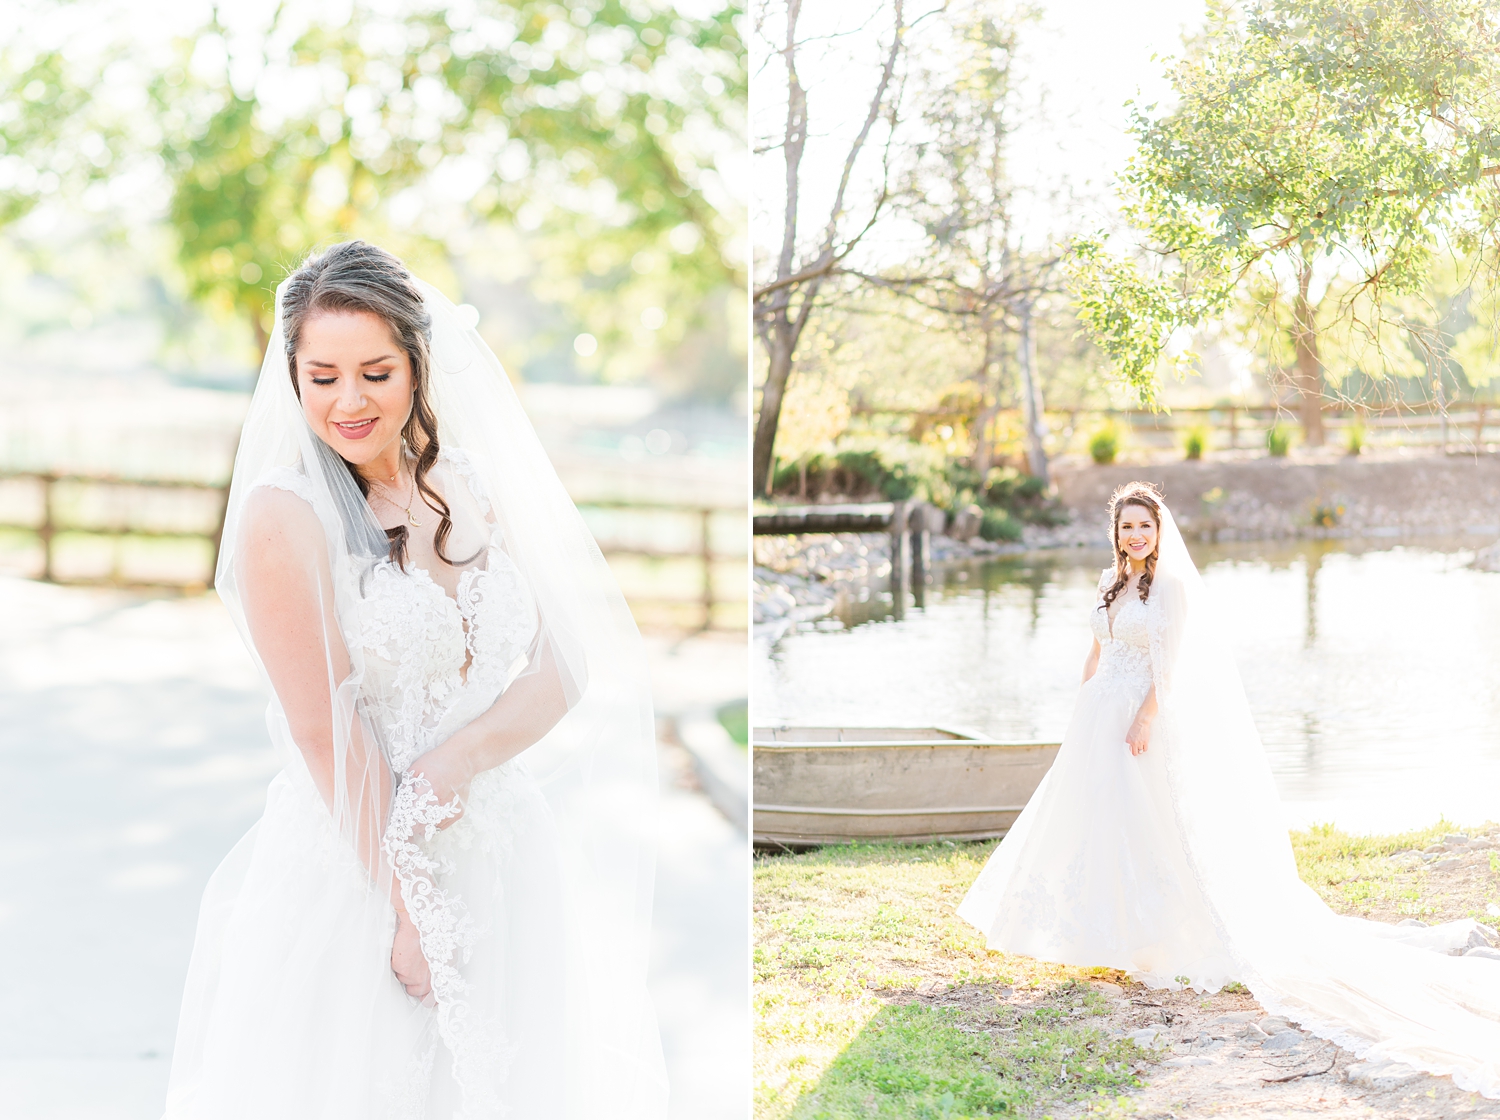 Bridal Session in a winery in temecula from a Temecula Wedding Photographer_0010.jpg